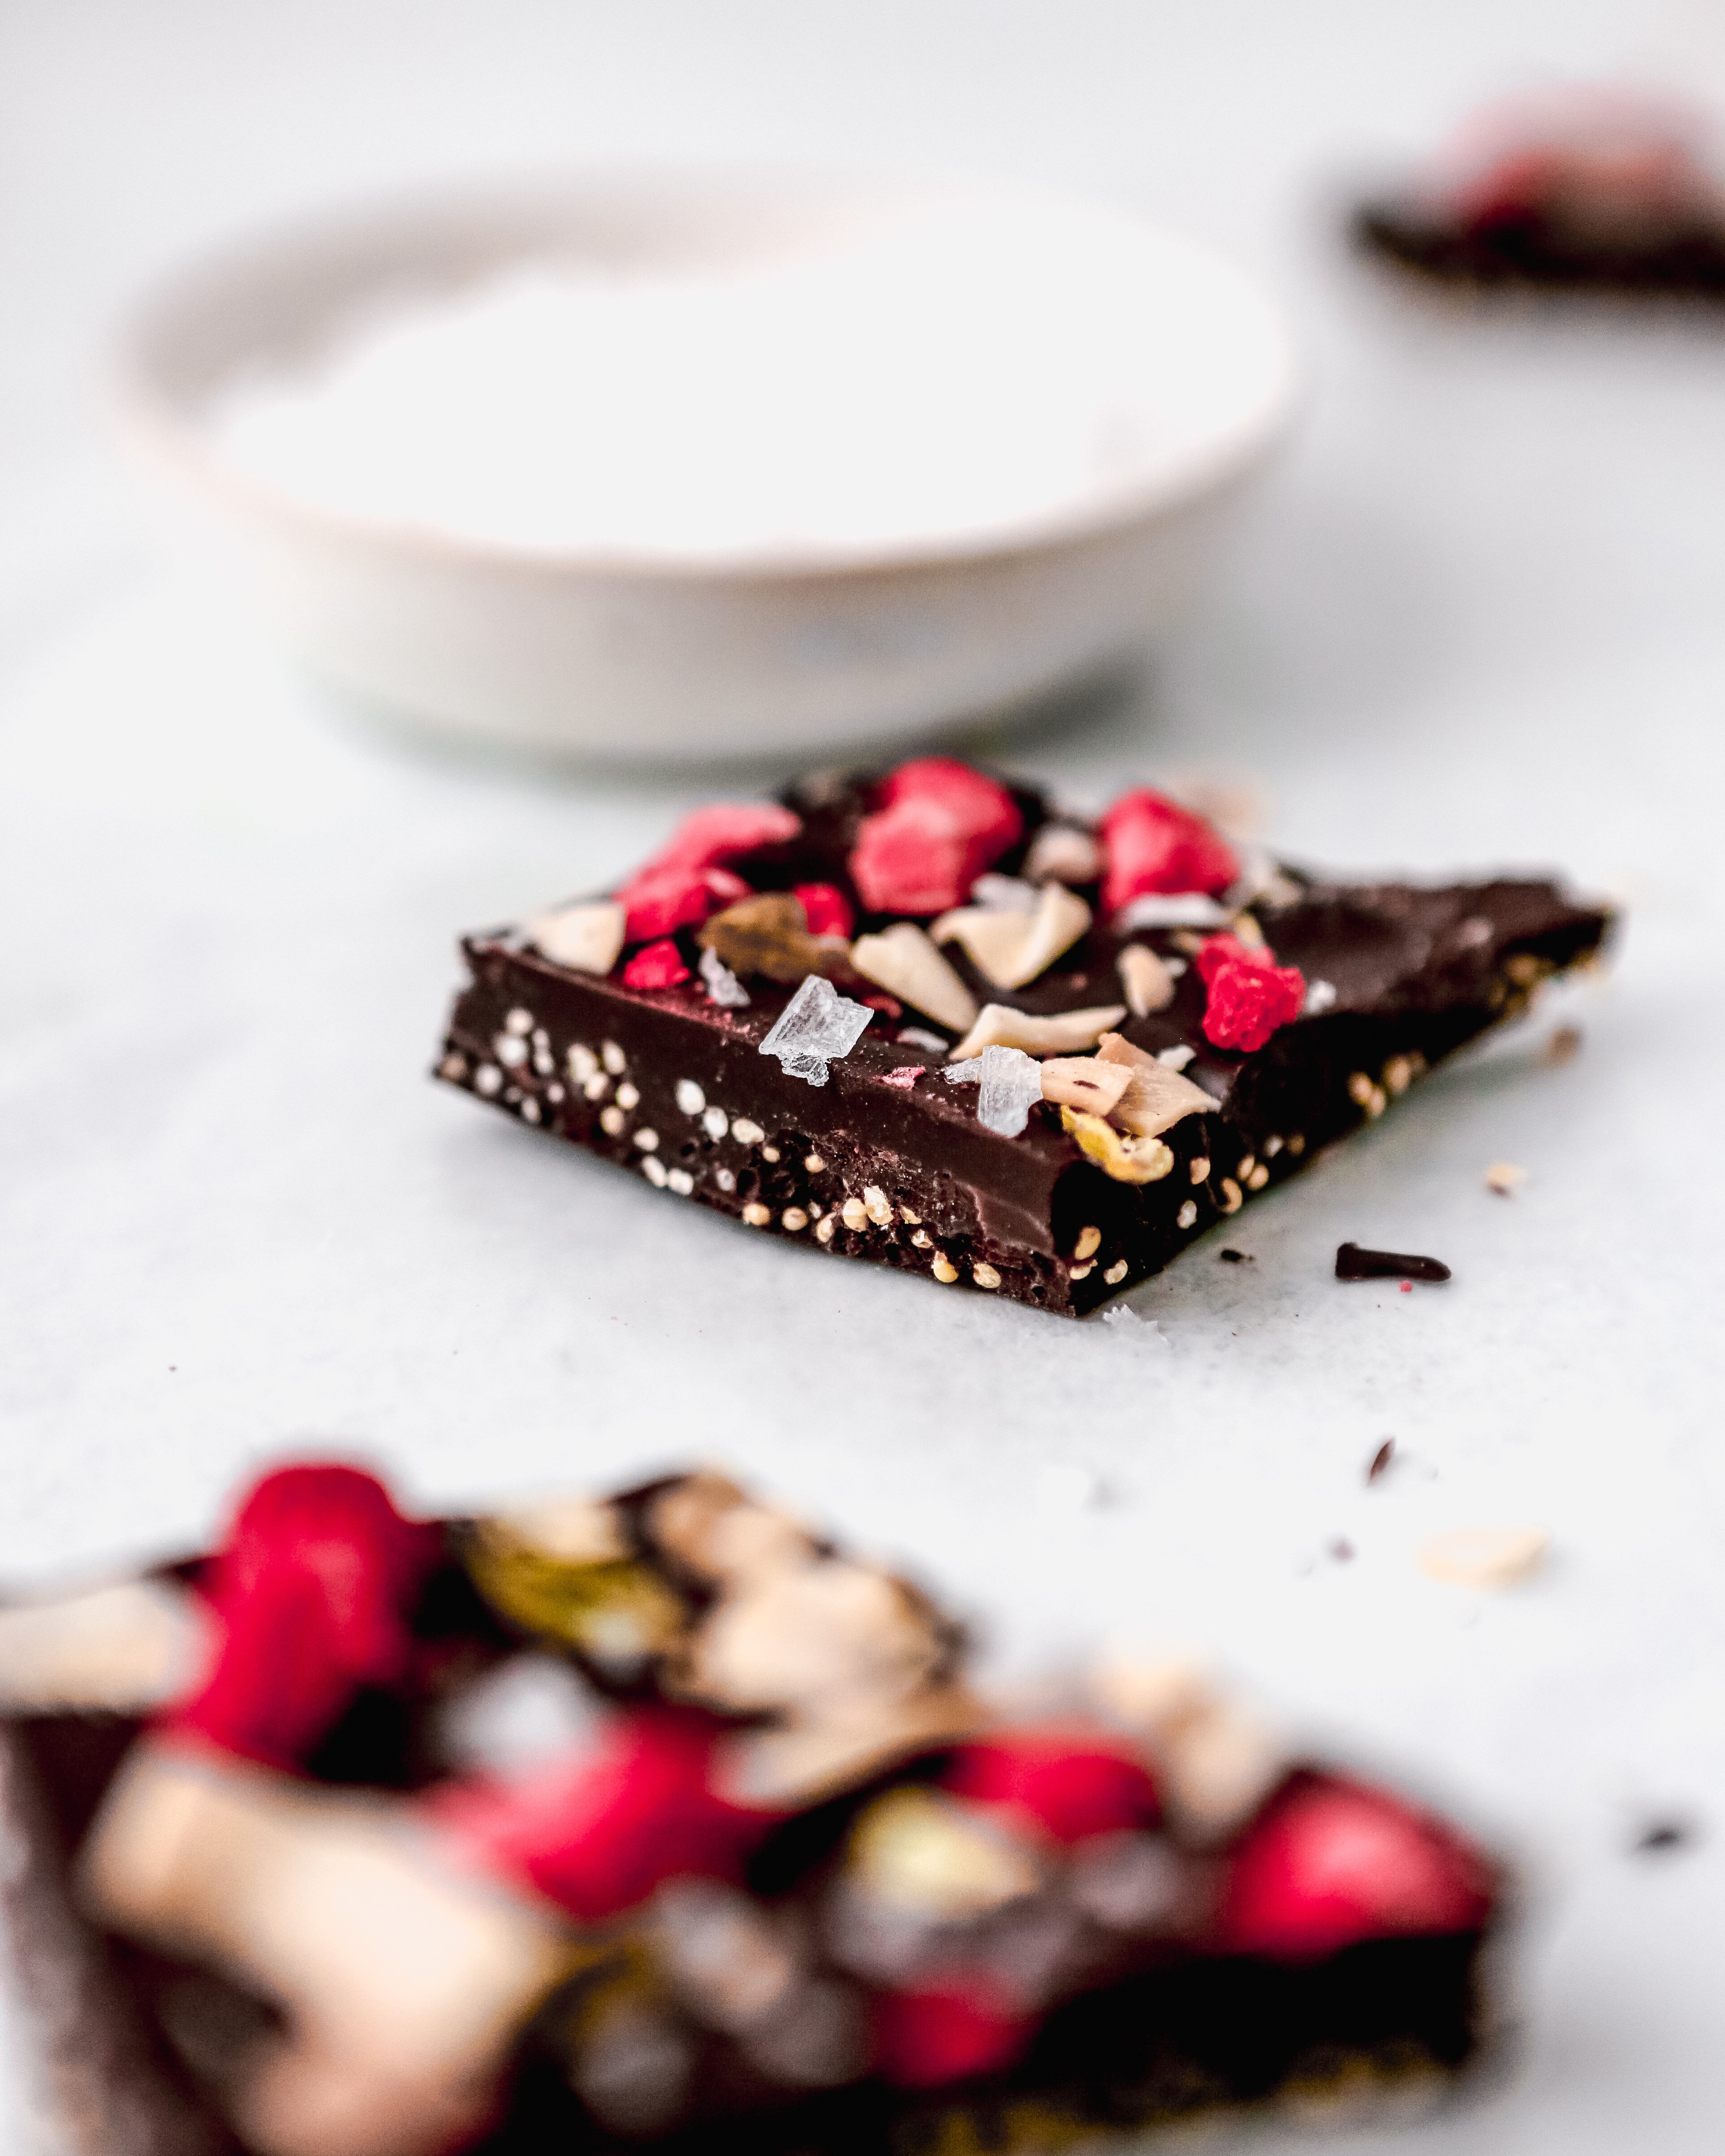 Photograph of dark chocolate coconut bark set on a white table with salt in the background